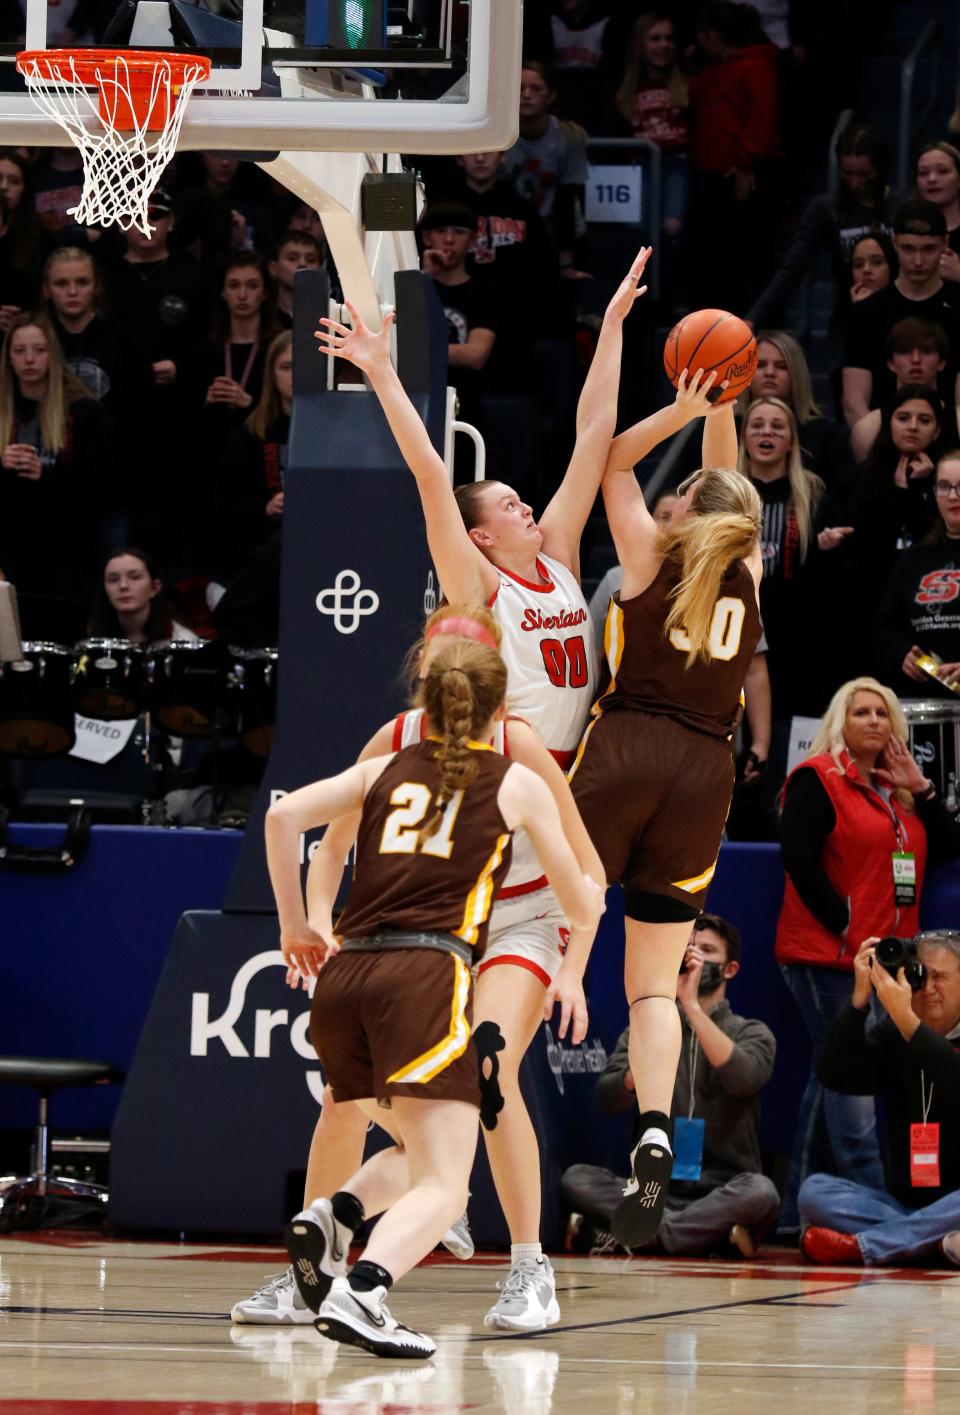 Faith Stinson, left, goes up for a block on Maddie Moody during Sheridan's 54-38 loss to Kettering Alter in the Division II state championship game on March 12, 2022, at University of Dayton Arena. Stinson is now at IUPUI after transferring from Akron, and has helped younger sister Jamisyn in the recruitment process.